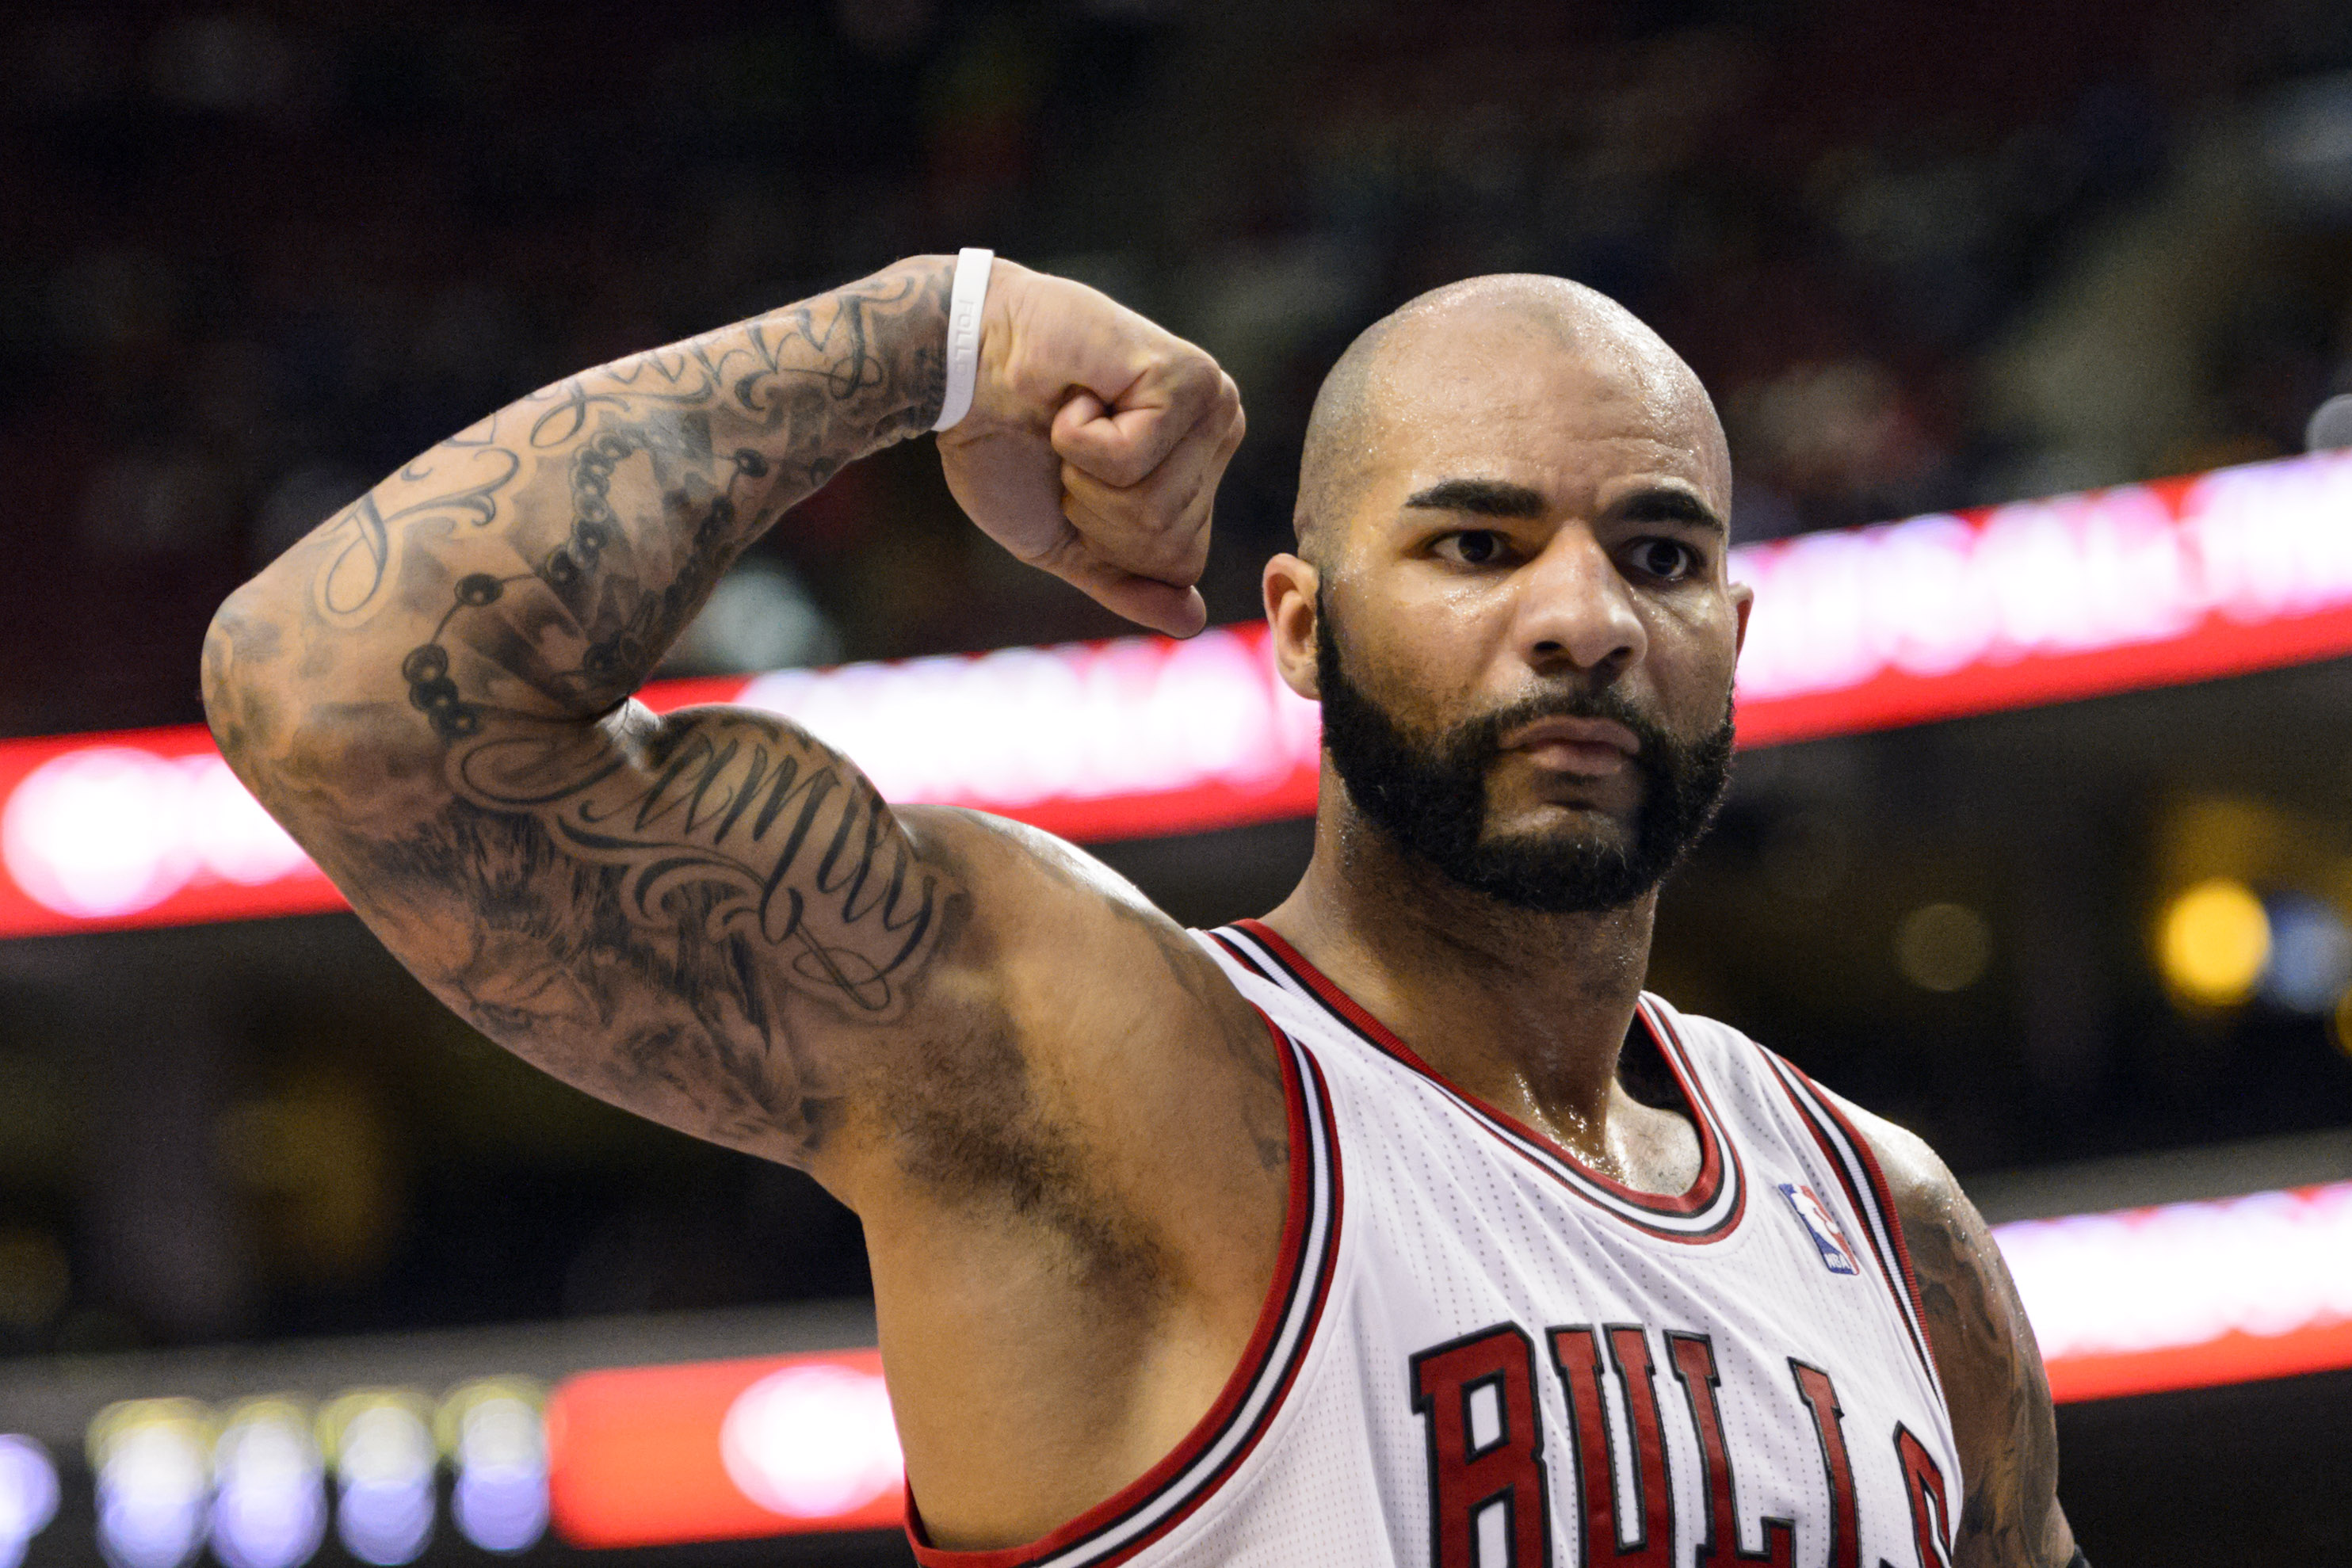 Nov 2, 2013; Philadelphia, PA, USA; Chicago Bulls forward Carlos Boozer (5) celebrates making a basket and drawing the foul during the third quarter against the Philadelphia 76ers at Wells Fargo Center. The Sixers defeated the Bulls 107-104. Mandatory Credit: Howard Smith-USA TODAY Sports ORG XMIT: USATSI-139544 ORIG FILE ID: 20131102_hcs_sy4_033.JPG